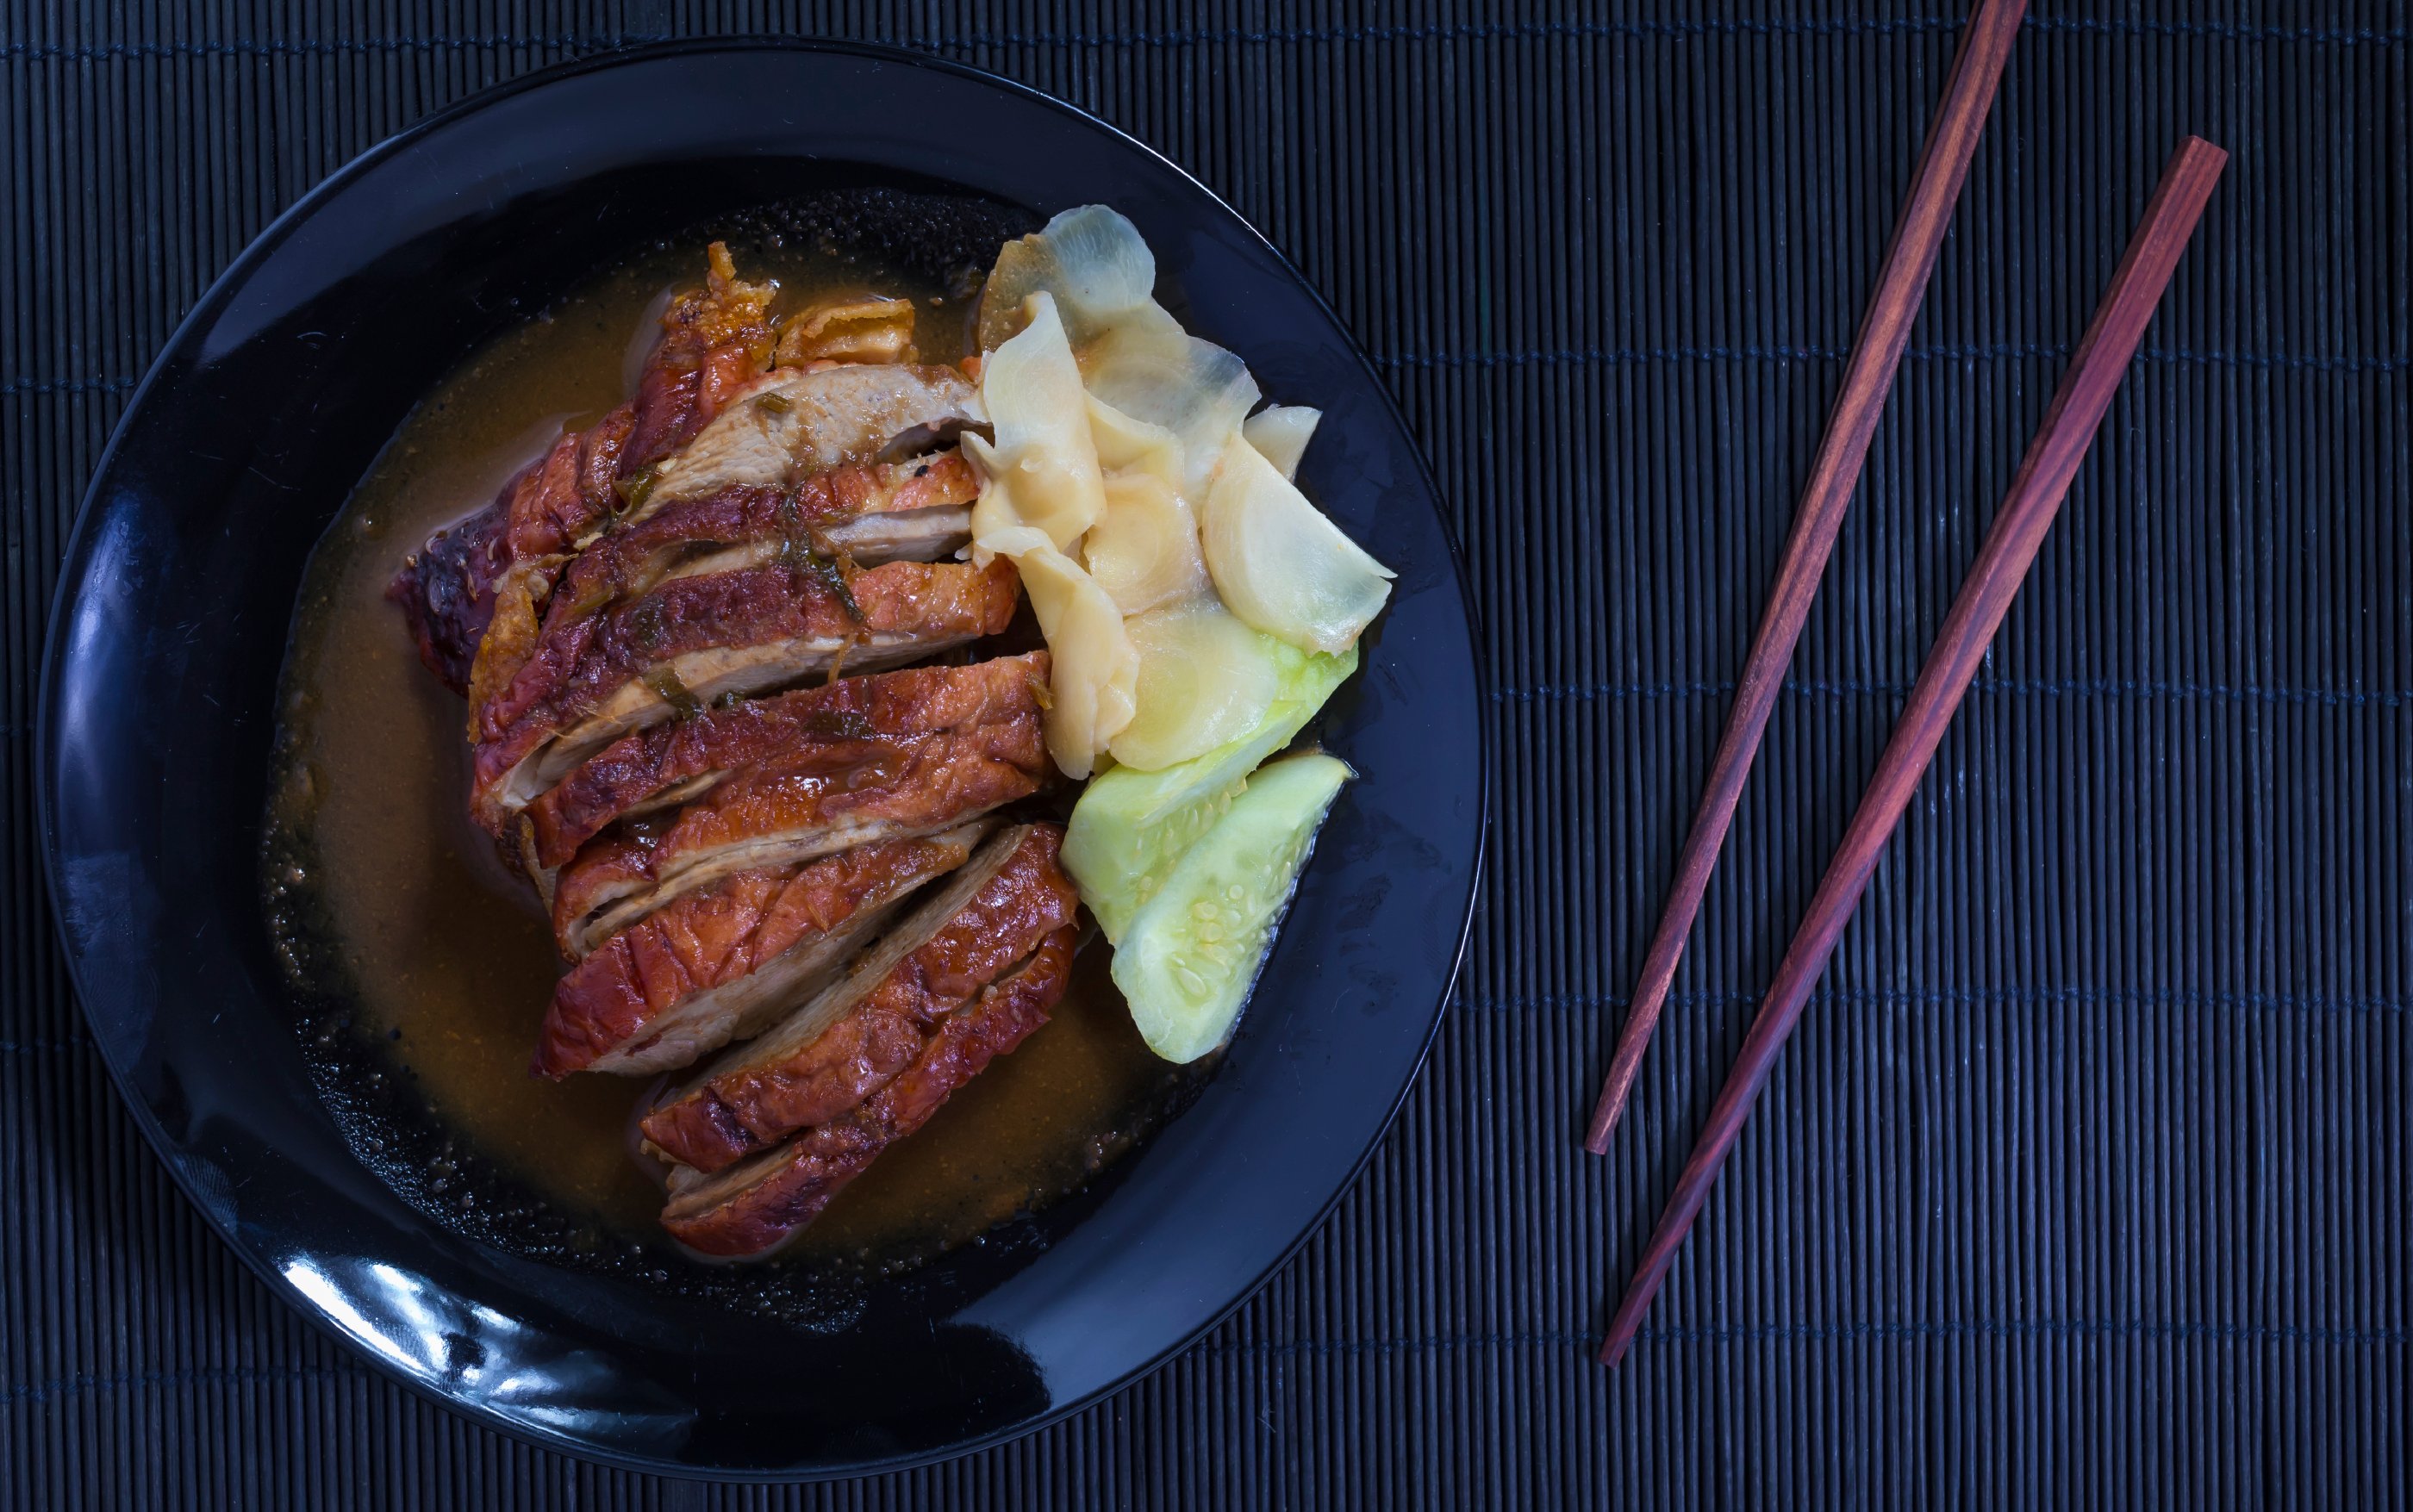 Roast duck and sauces in black dish with chopsticks over Black Sushi mat